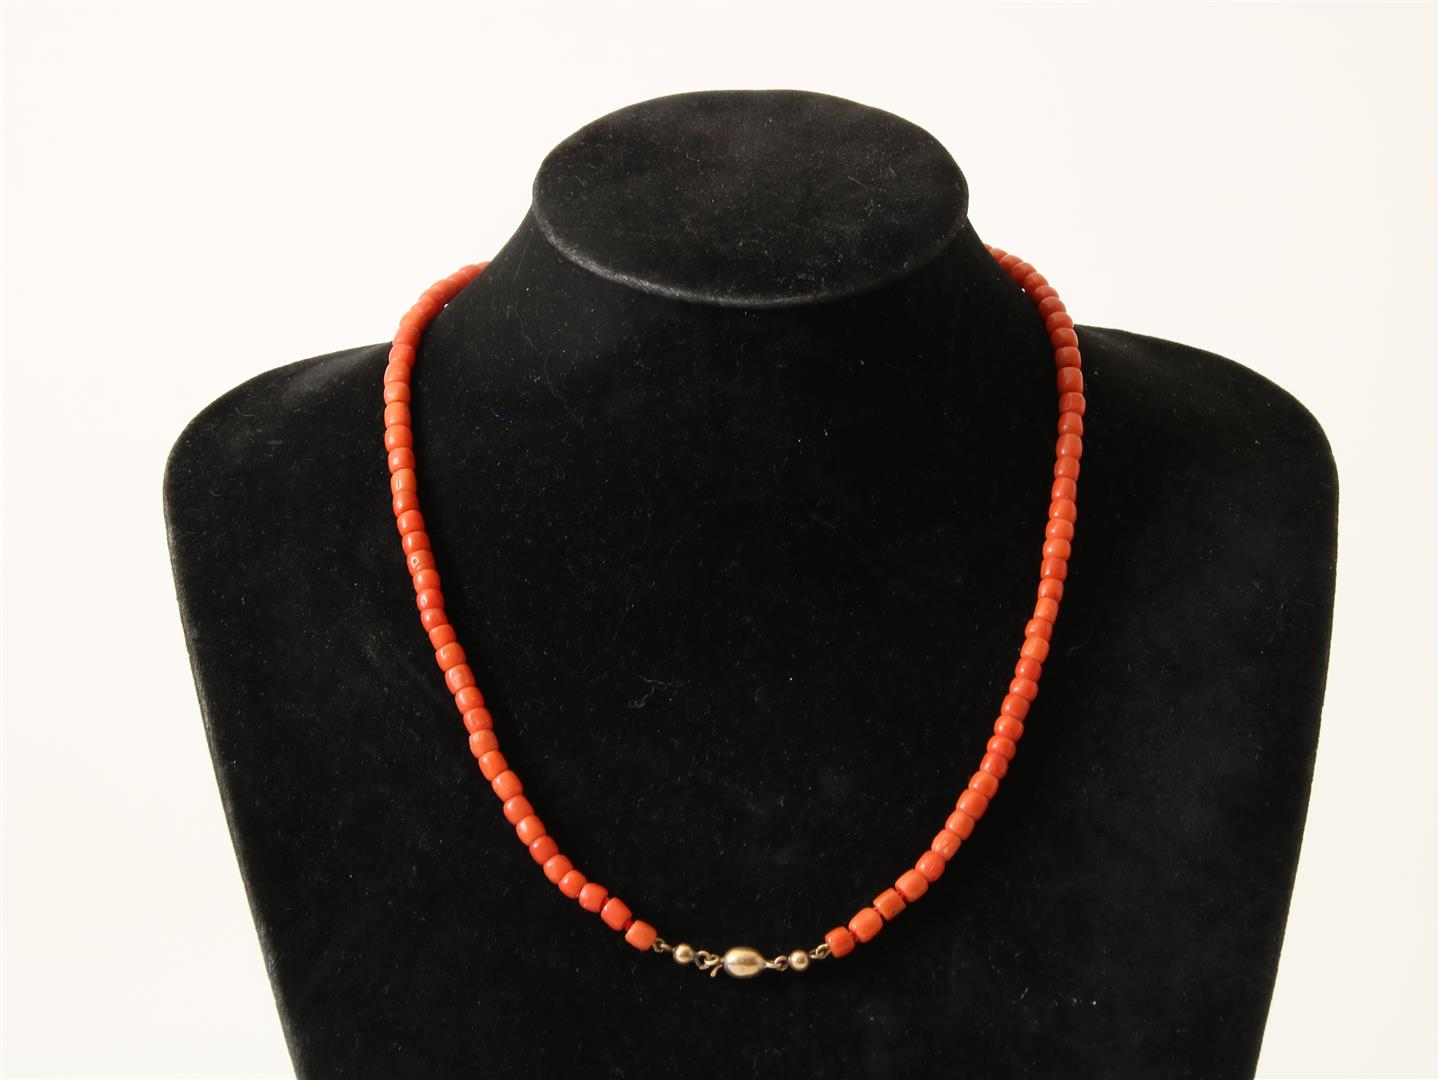 Red coral necklace on gold barrel clasp, l. 50 cm. - Image 3 of 3